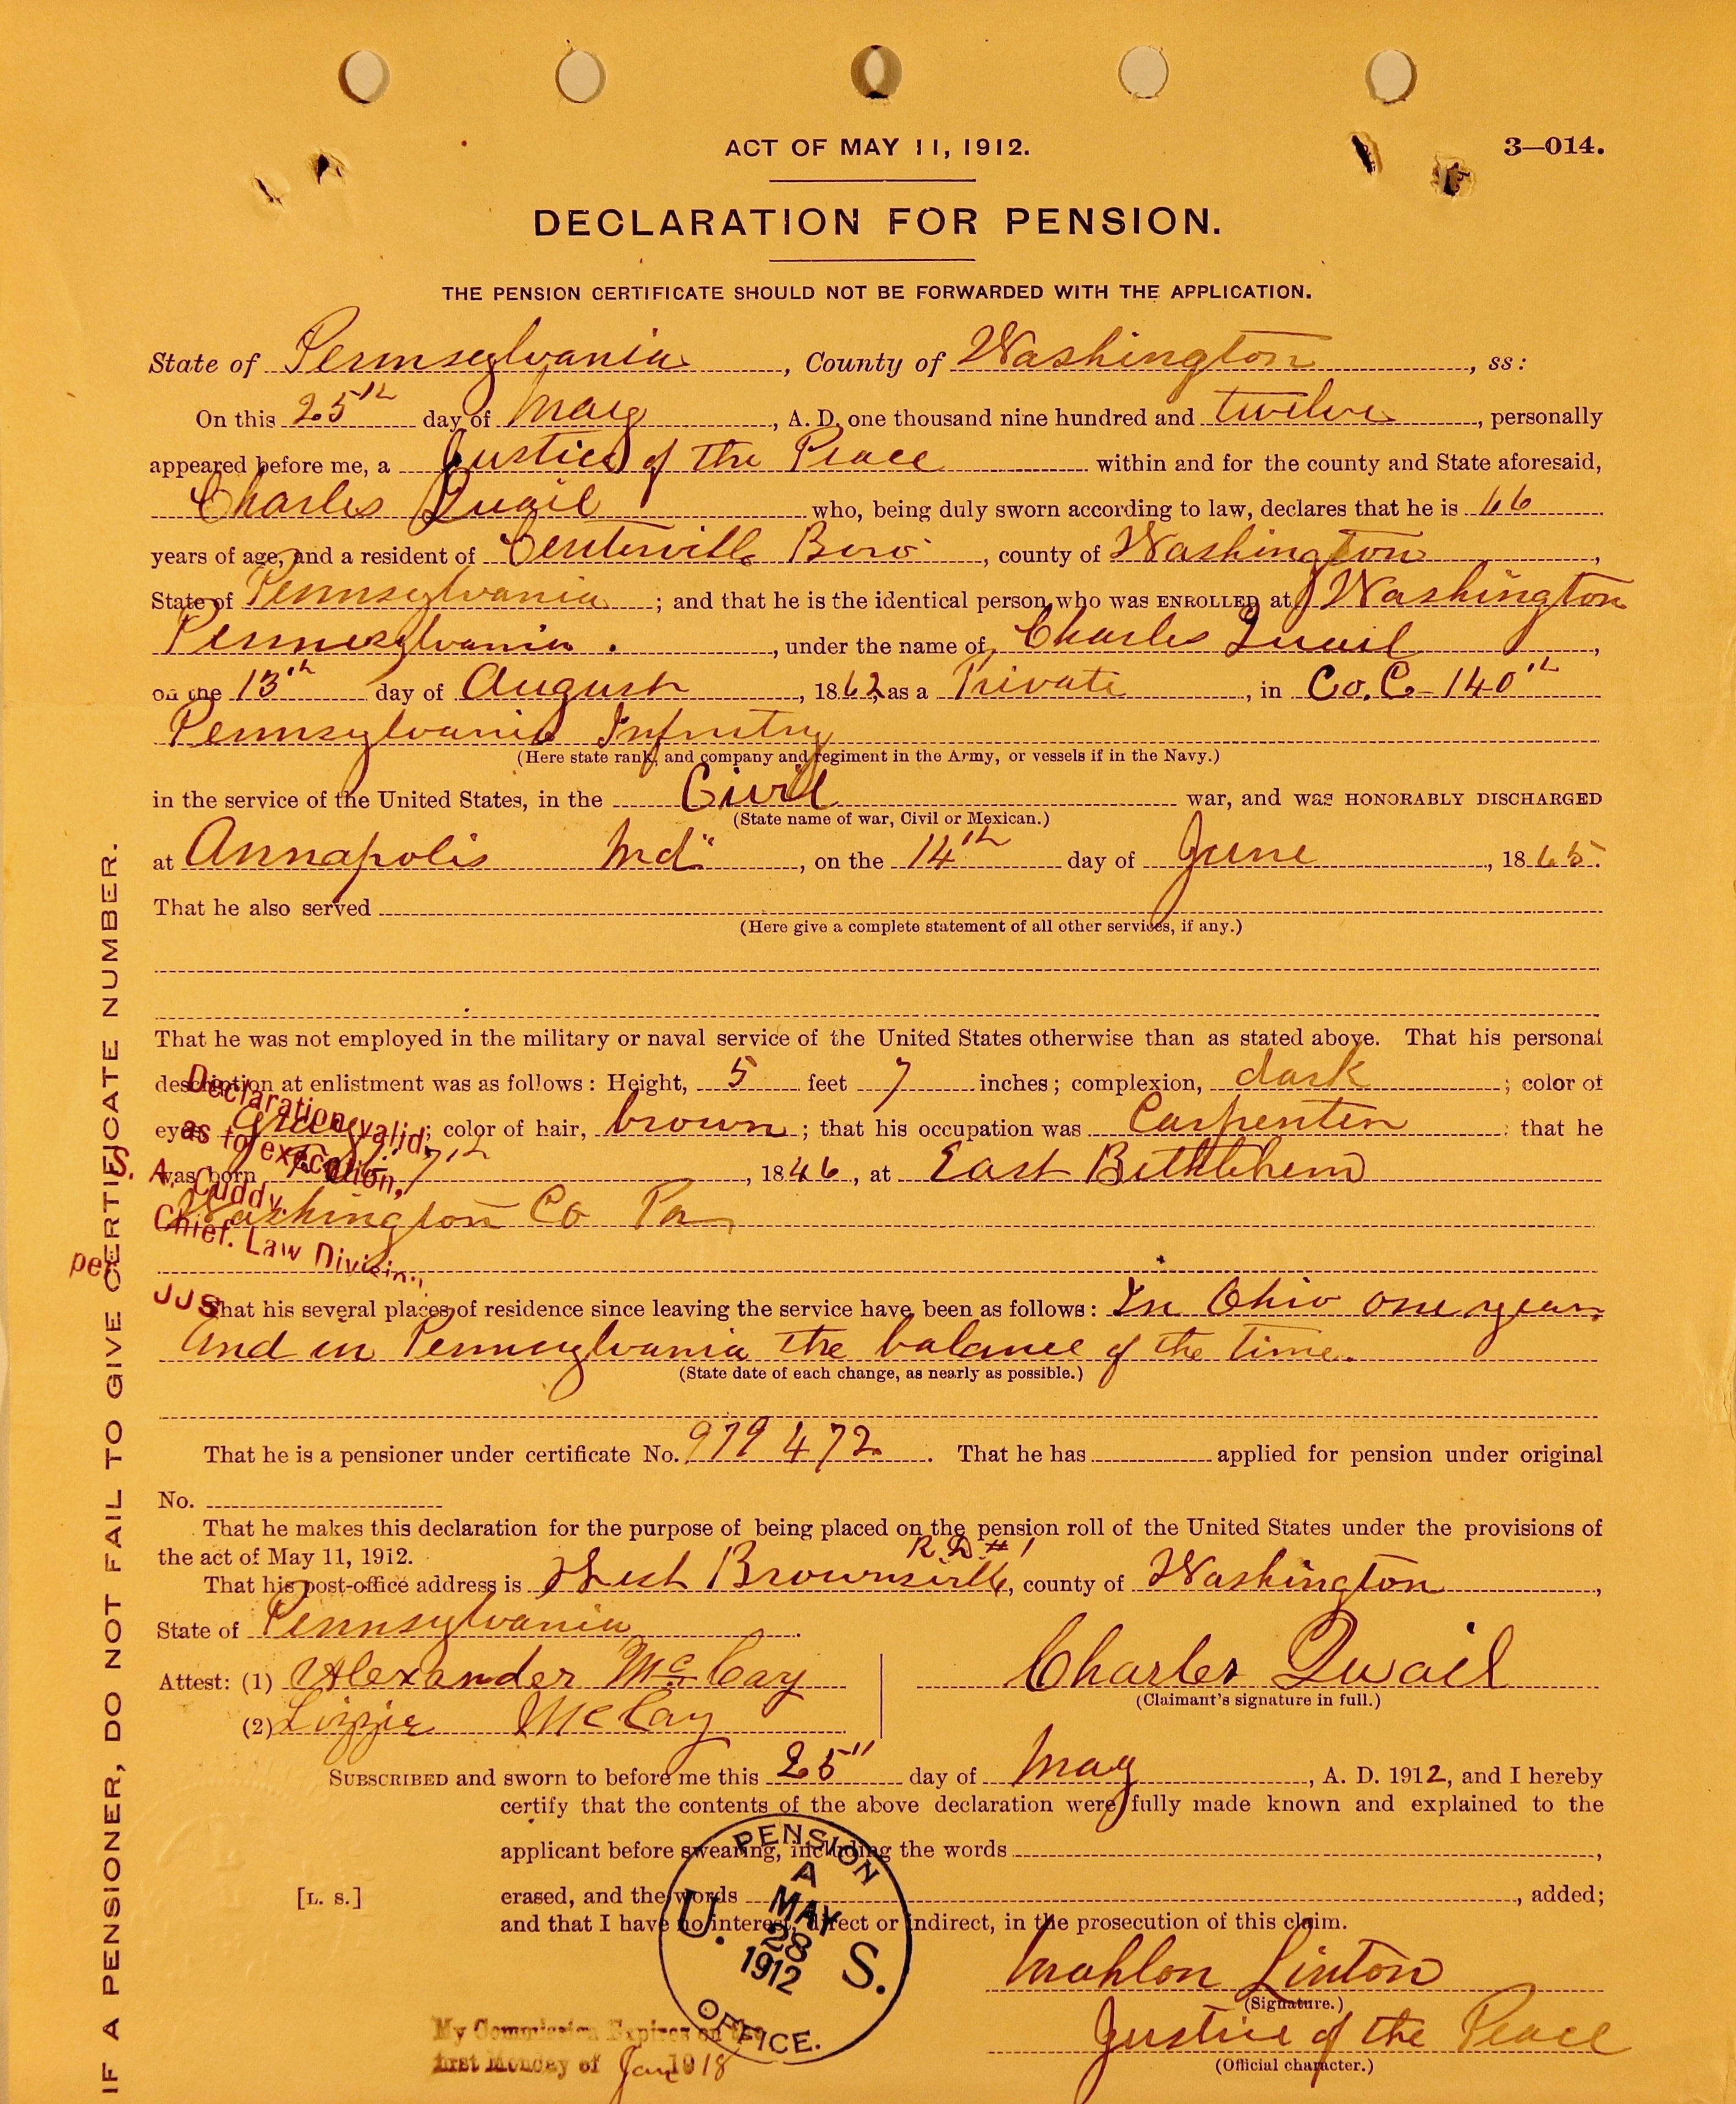 An application for a pension under the act of May 11, 1912